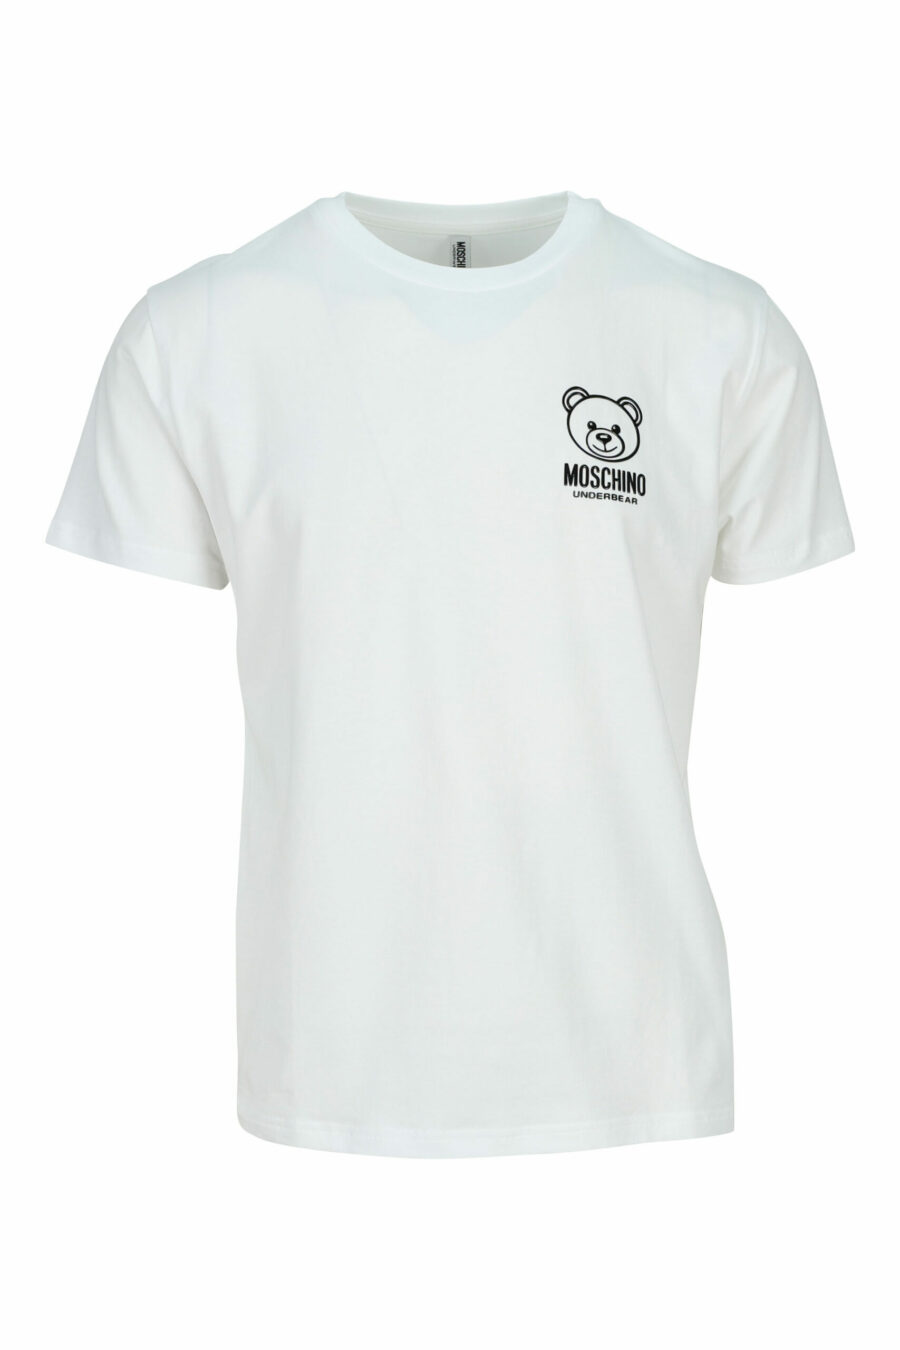 White T-shirt with mini-logo bear "underbear" in black rubber - 667113602585 scaled